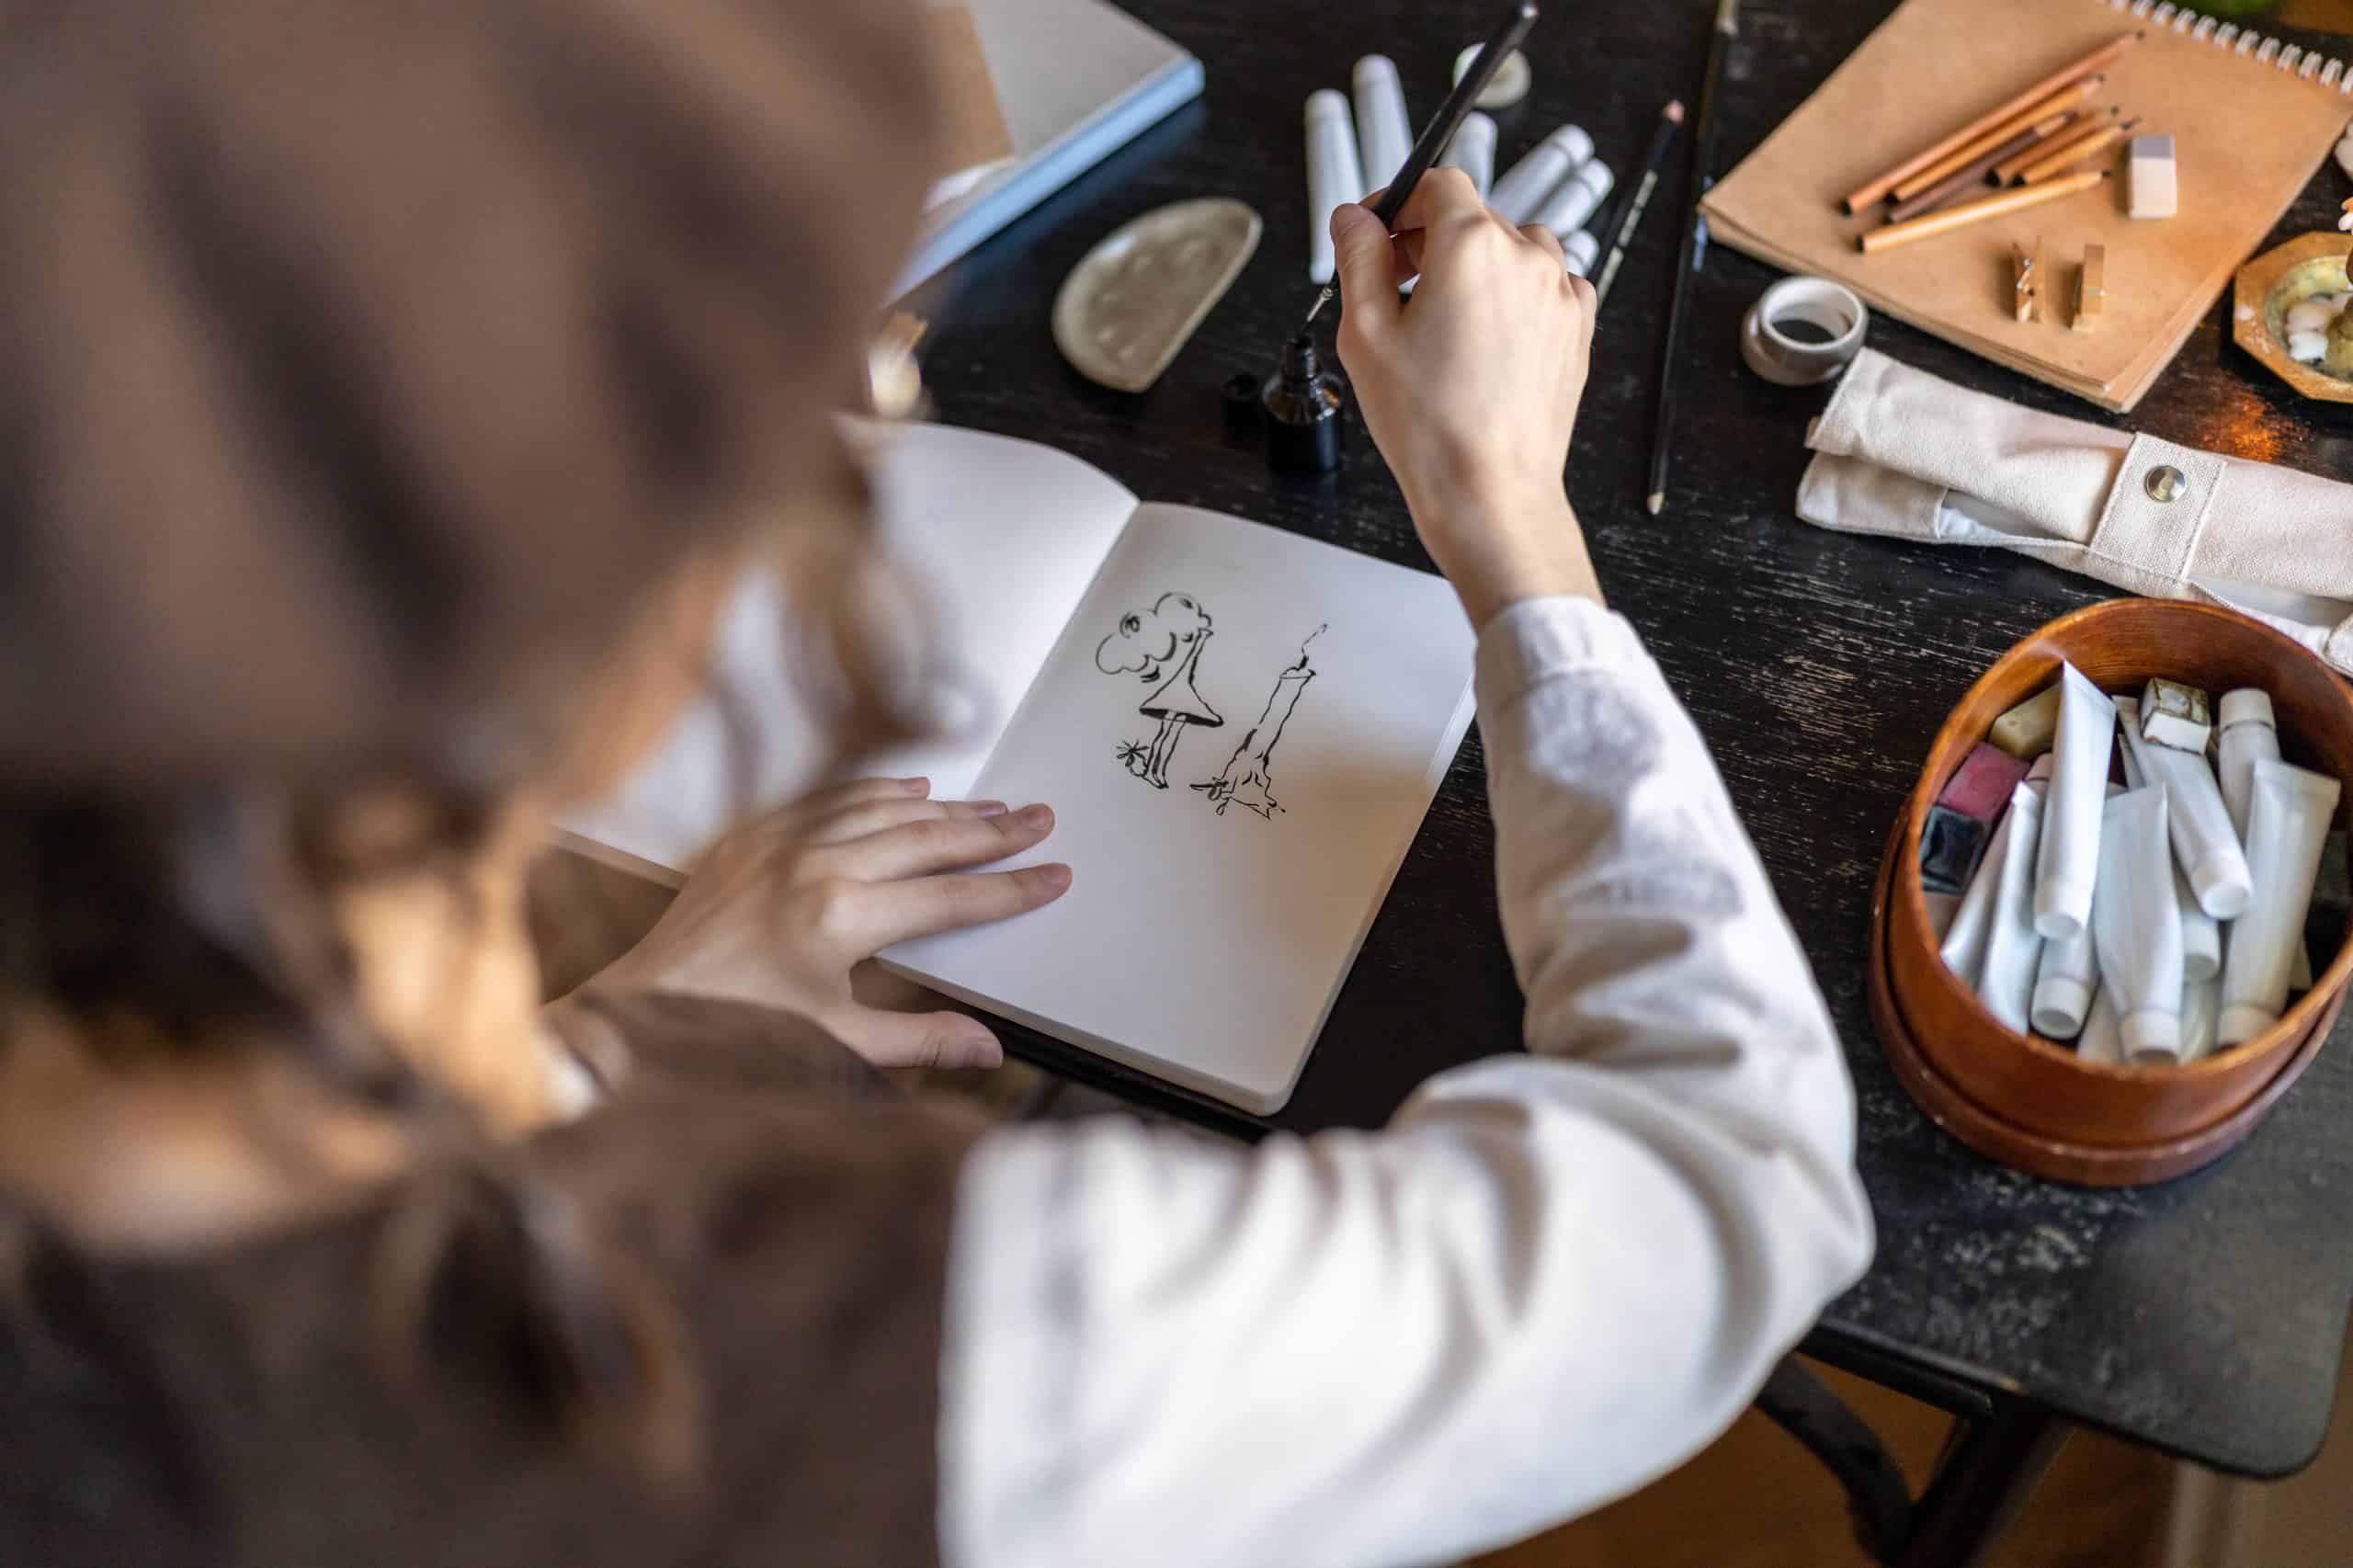 How to become a cartoonist in 10 steps